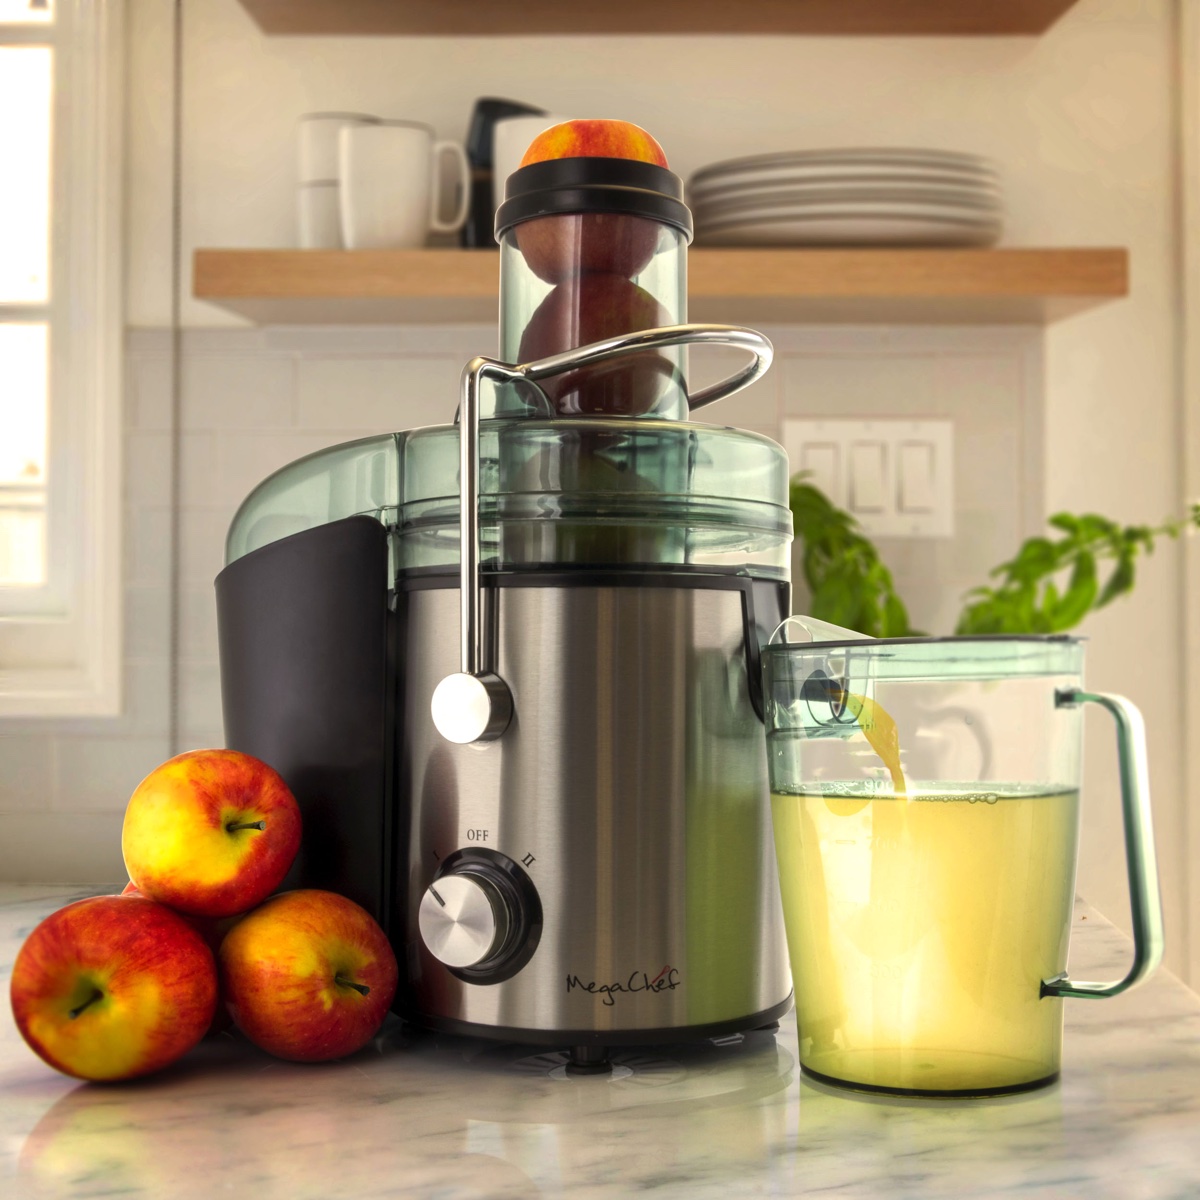 How To Make Apple Juice With Juicer